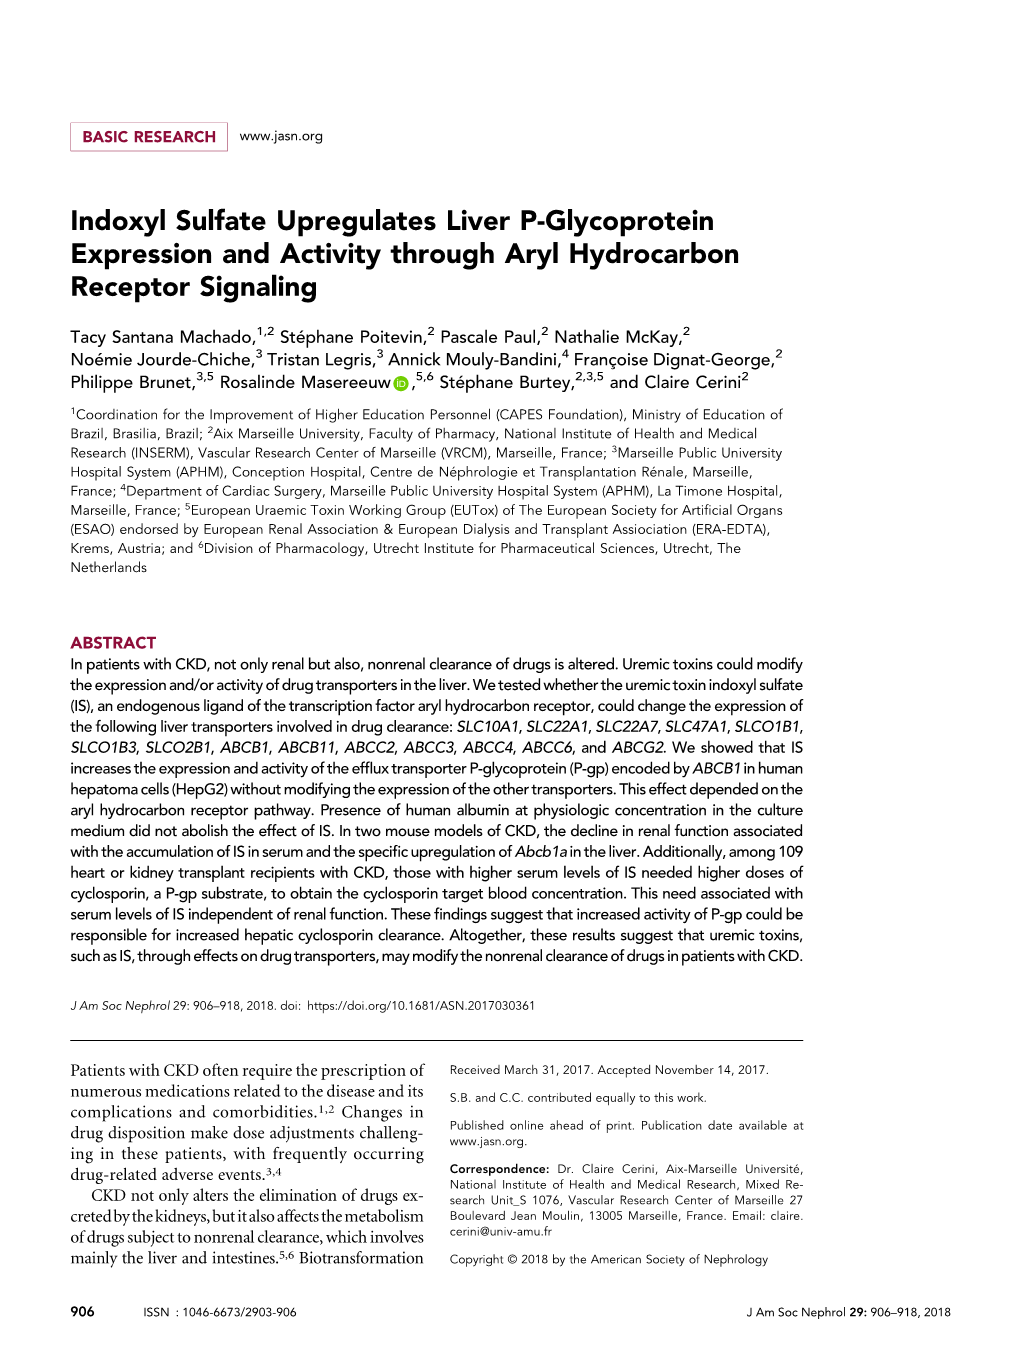 Indoxyl Sulfate Upregulates Liver P-Glycoprotein Expression and Activity Through Aryl Hydrocarbon Receptor Signaling